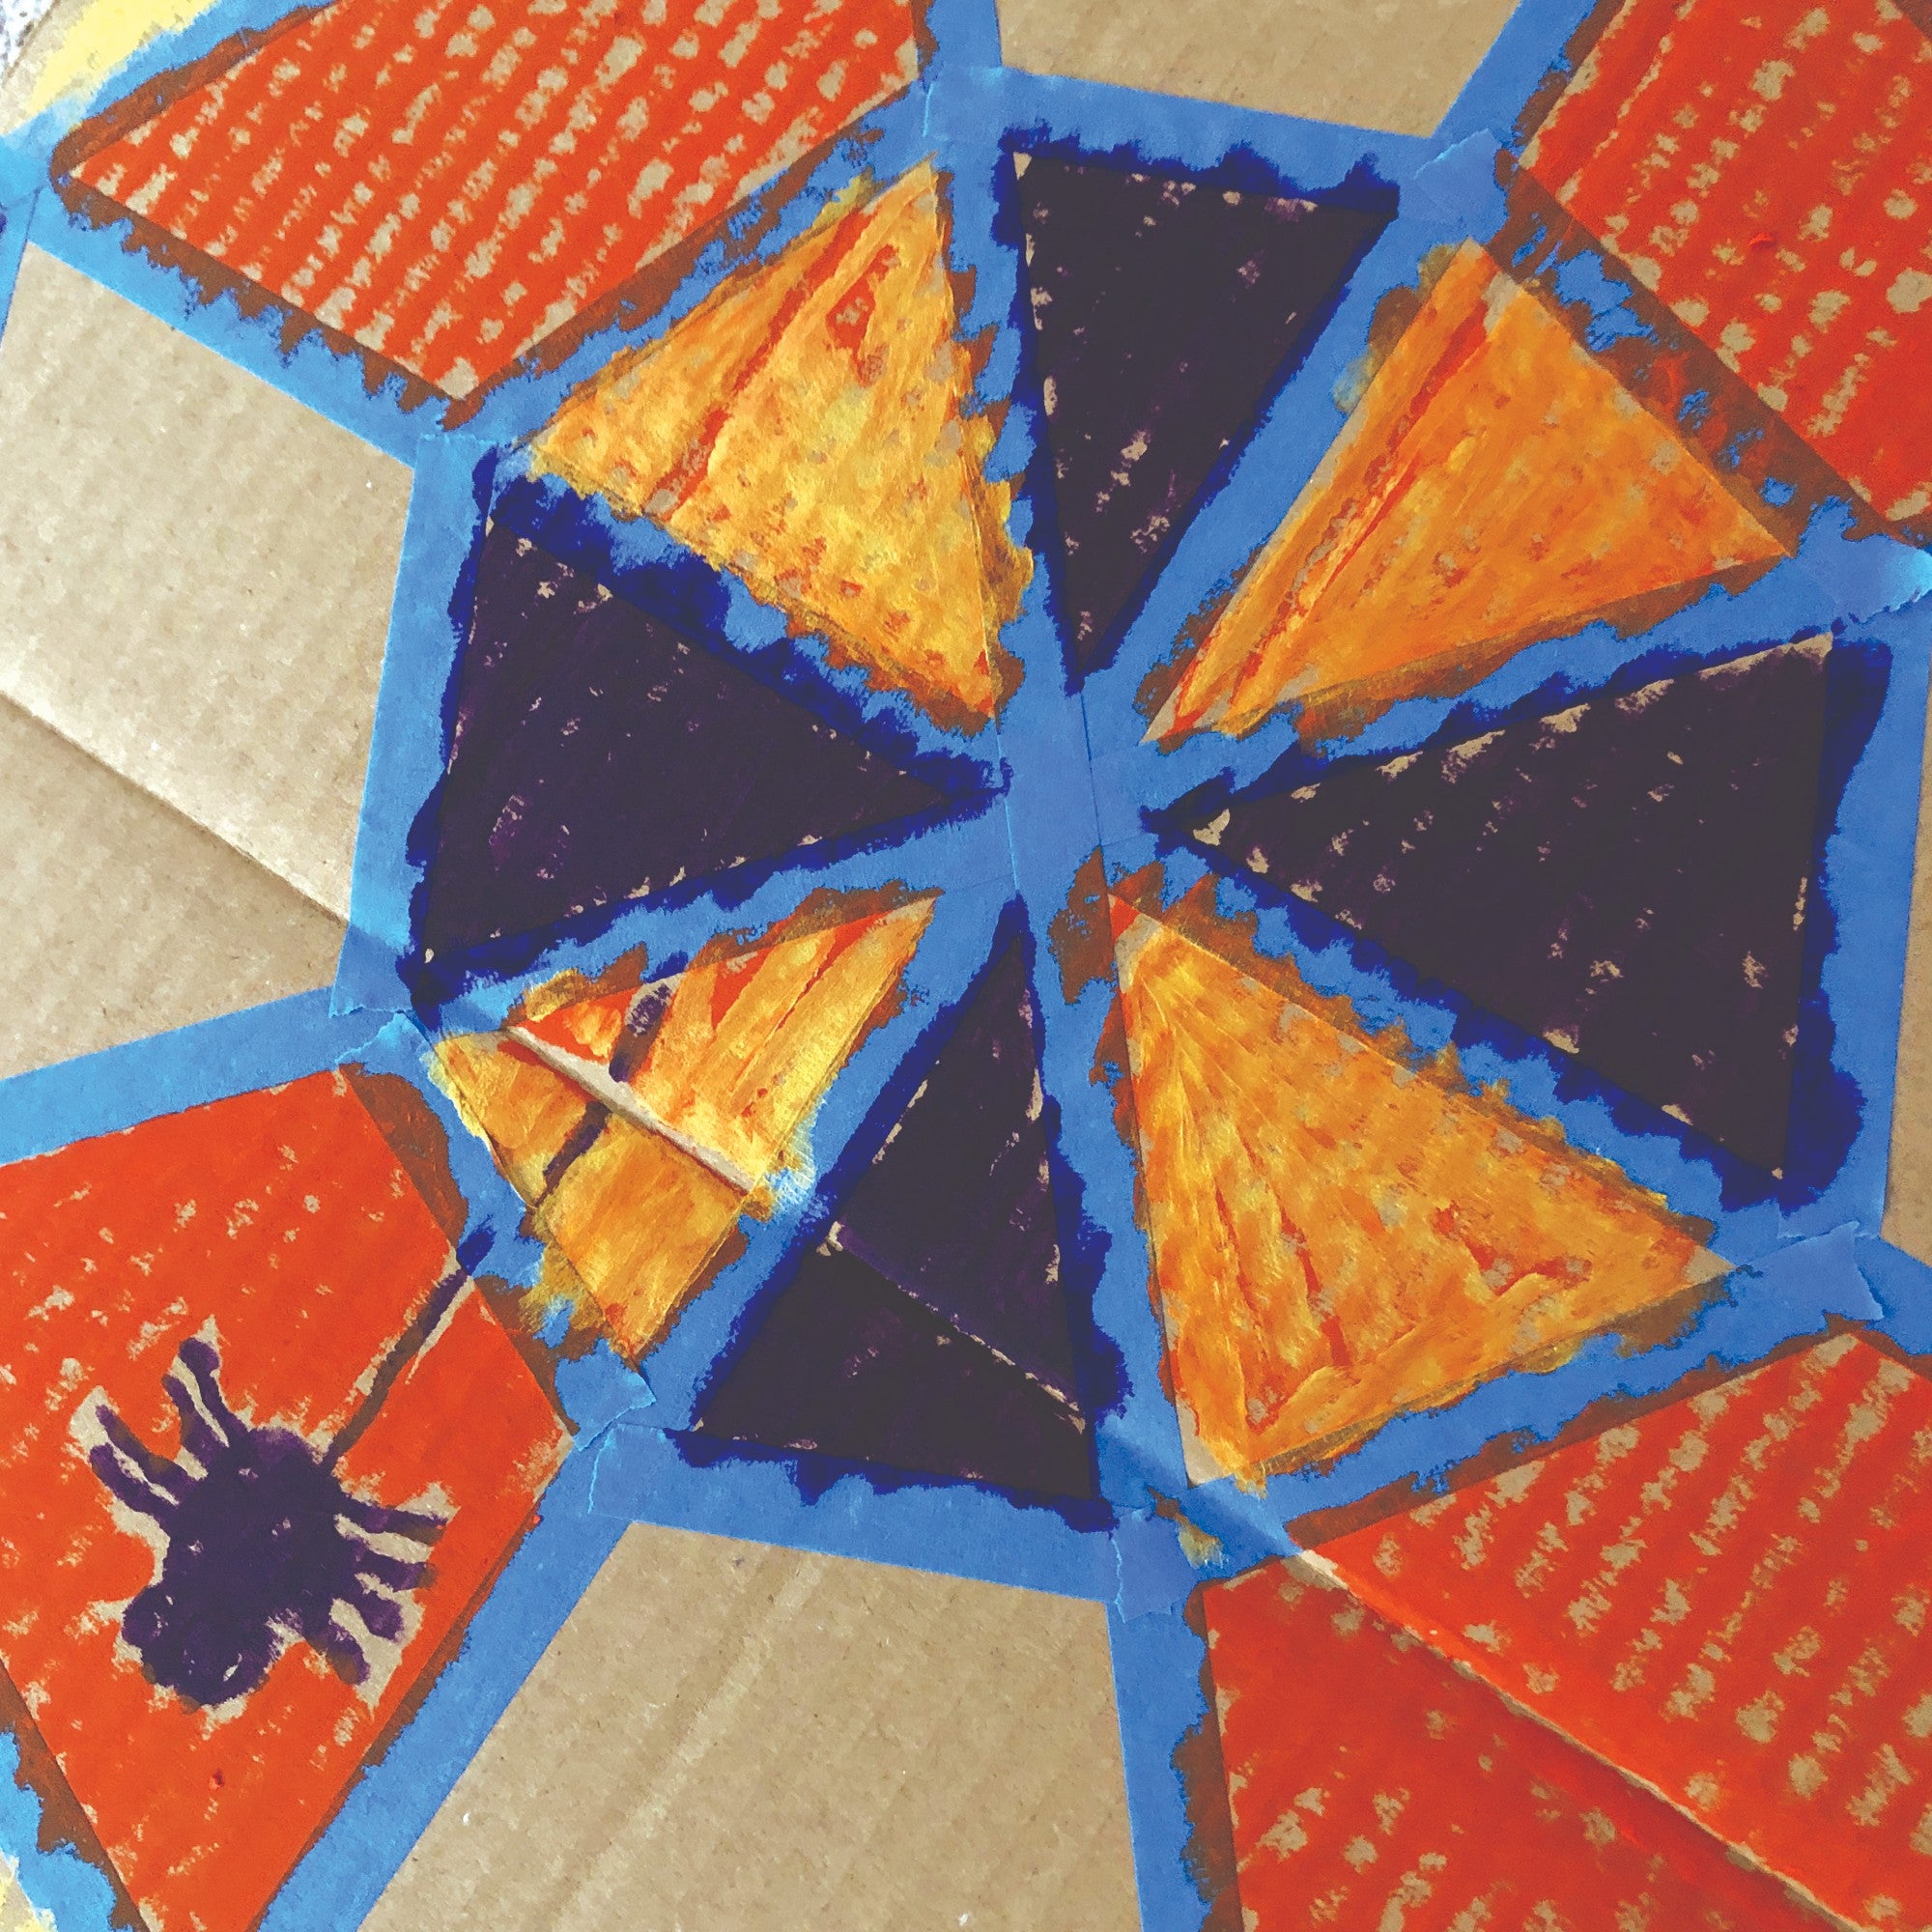 Cardboard spider web with spider and metallic colors on top of regular colors